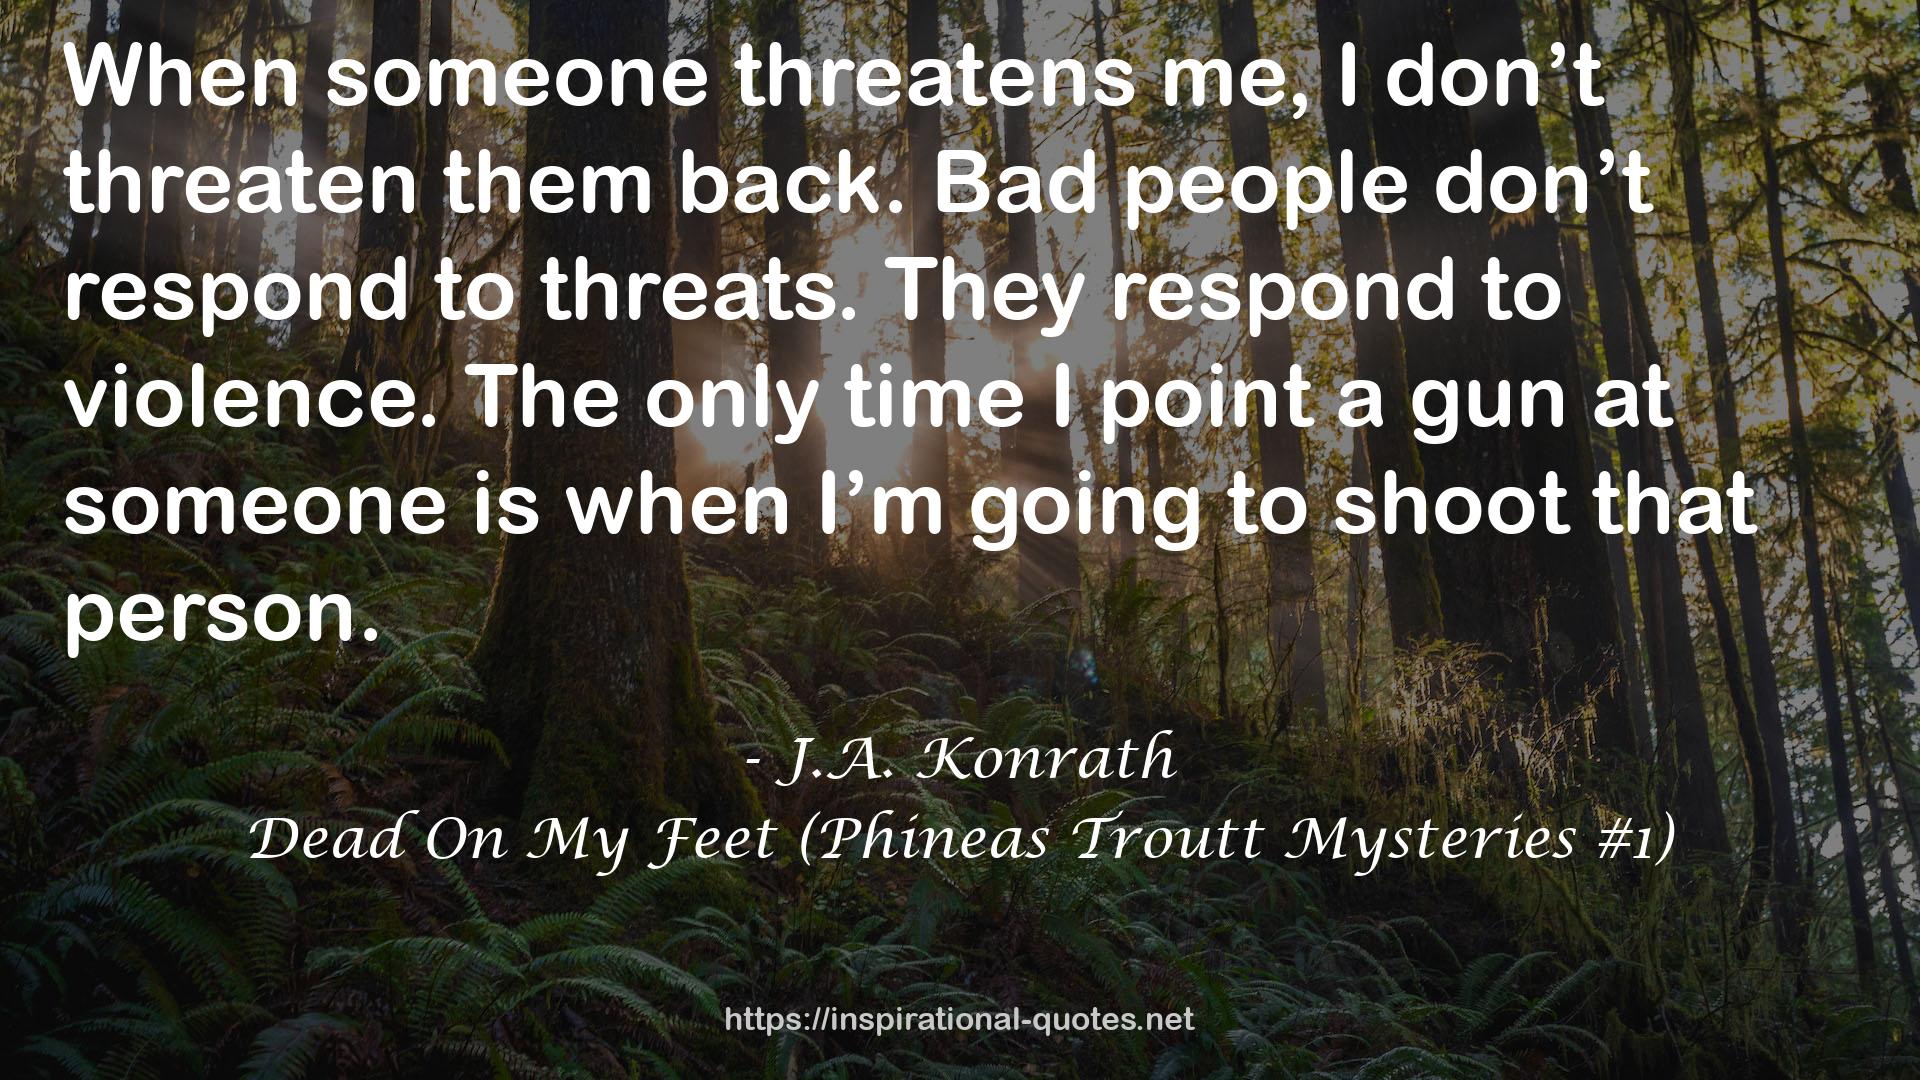 Dead On My Feet (Phineas Troutt Mysteries #1) QUOTES